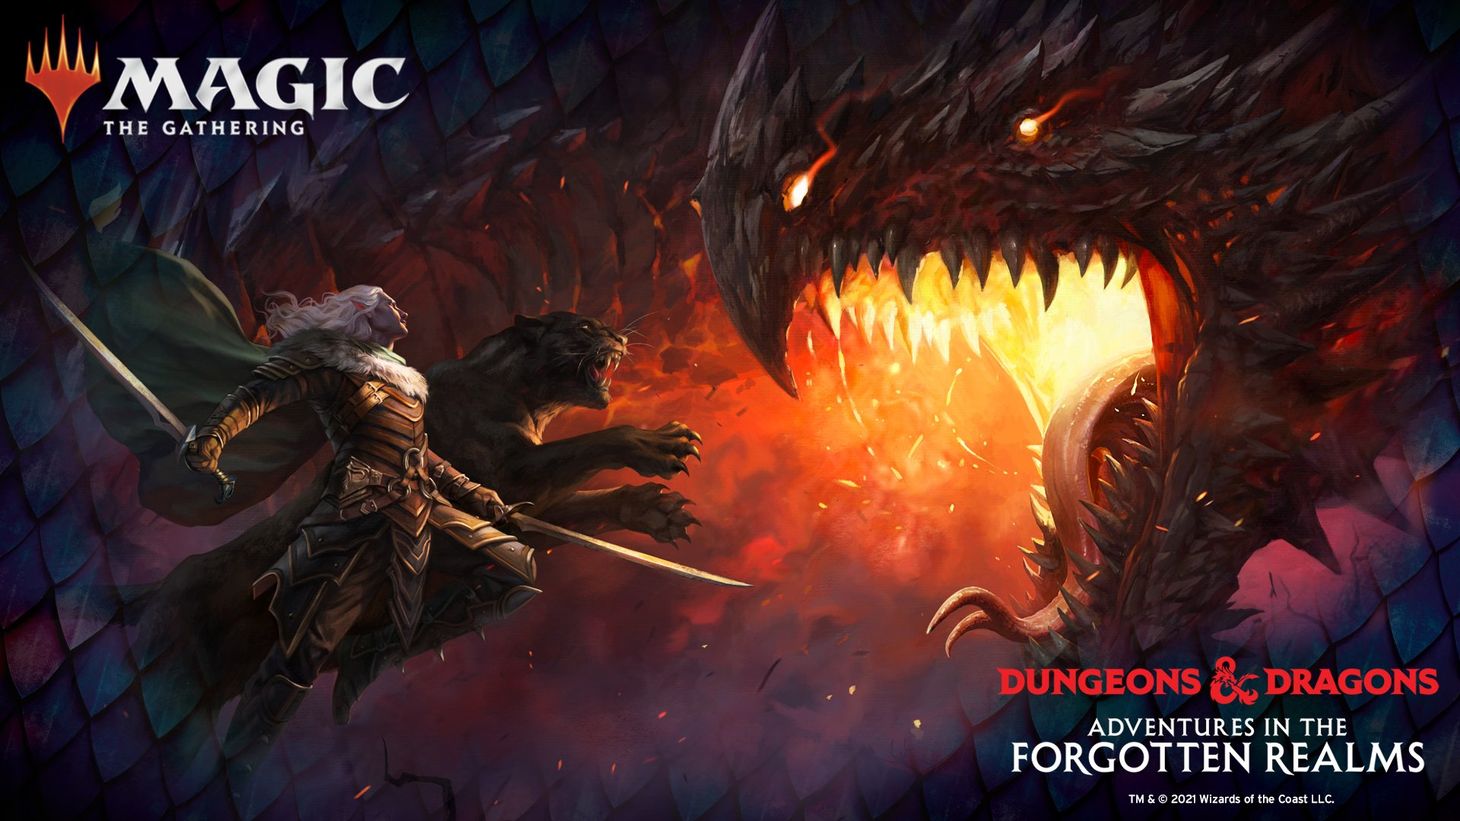 D&D arrives in Magic Arena today as the Forgotten Realms set goes live